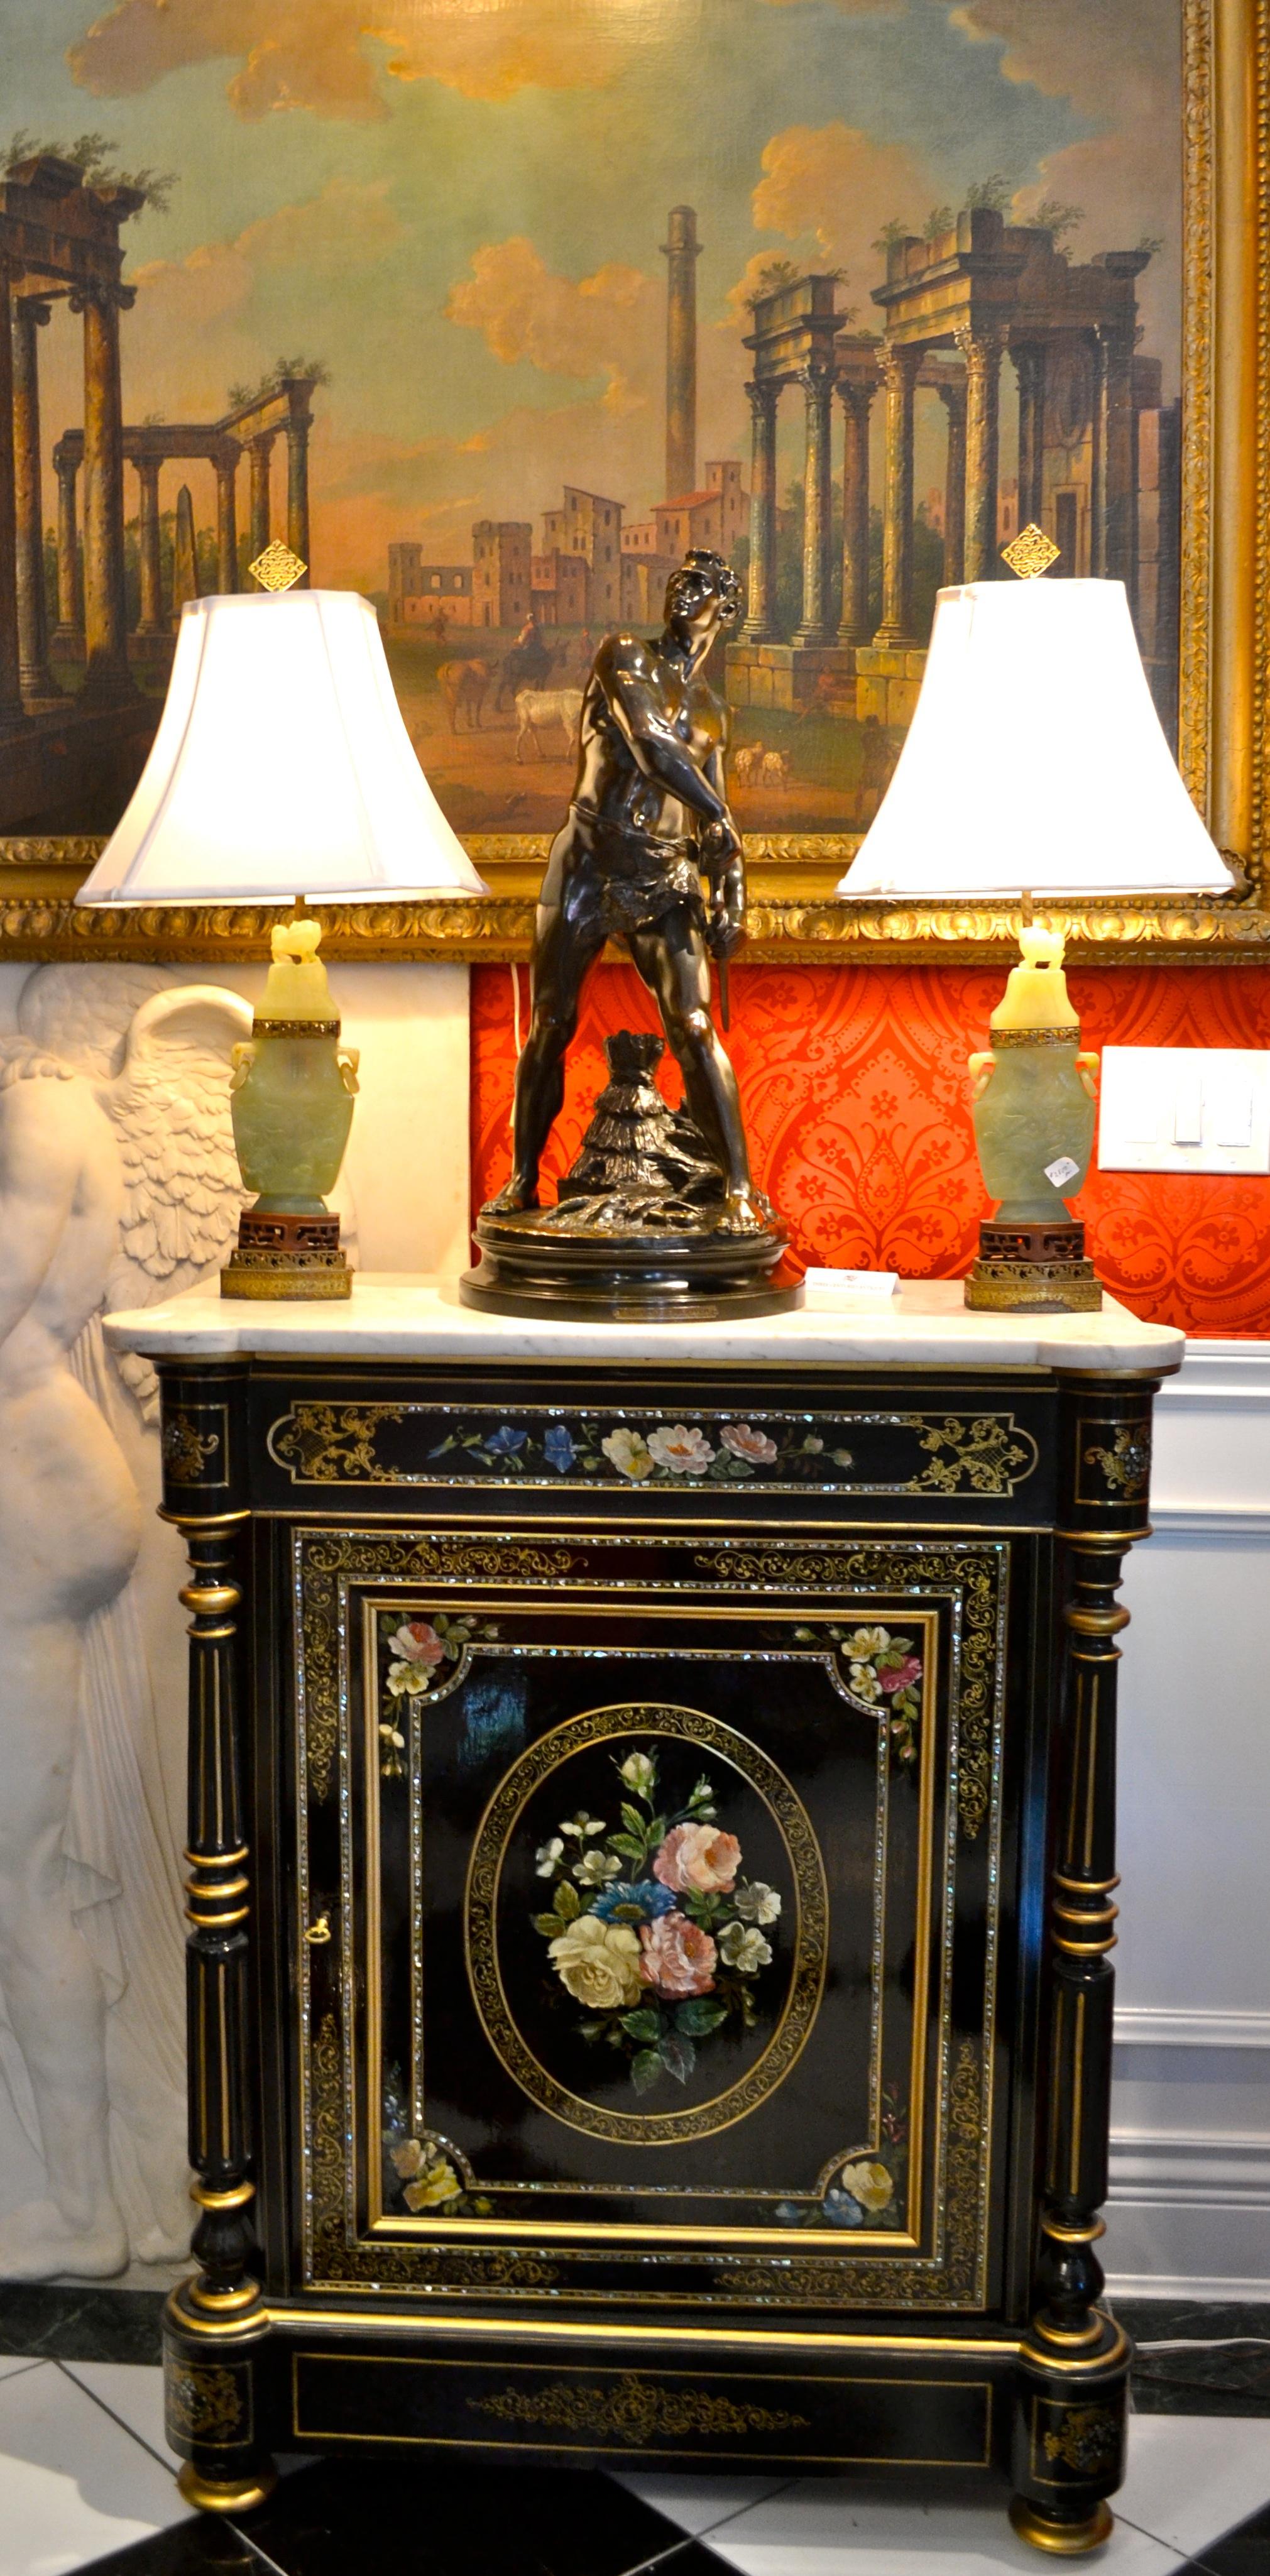 Mahogany Napoleon III Ebonized and Painted Commode Called Meuble D’appui in French For Sale